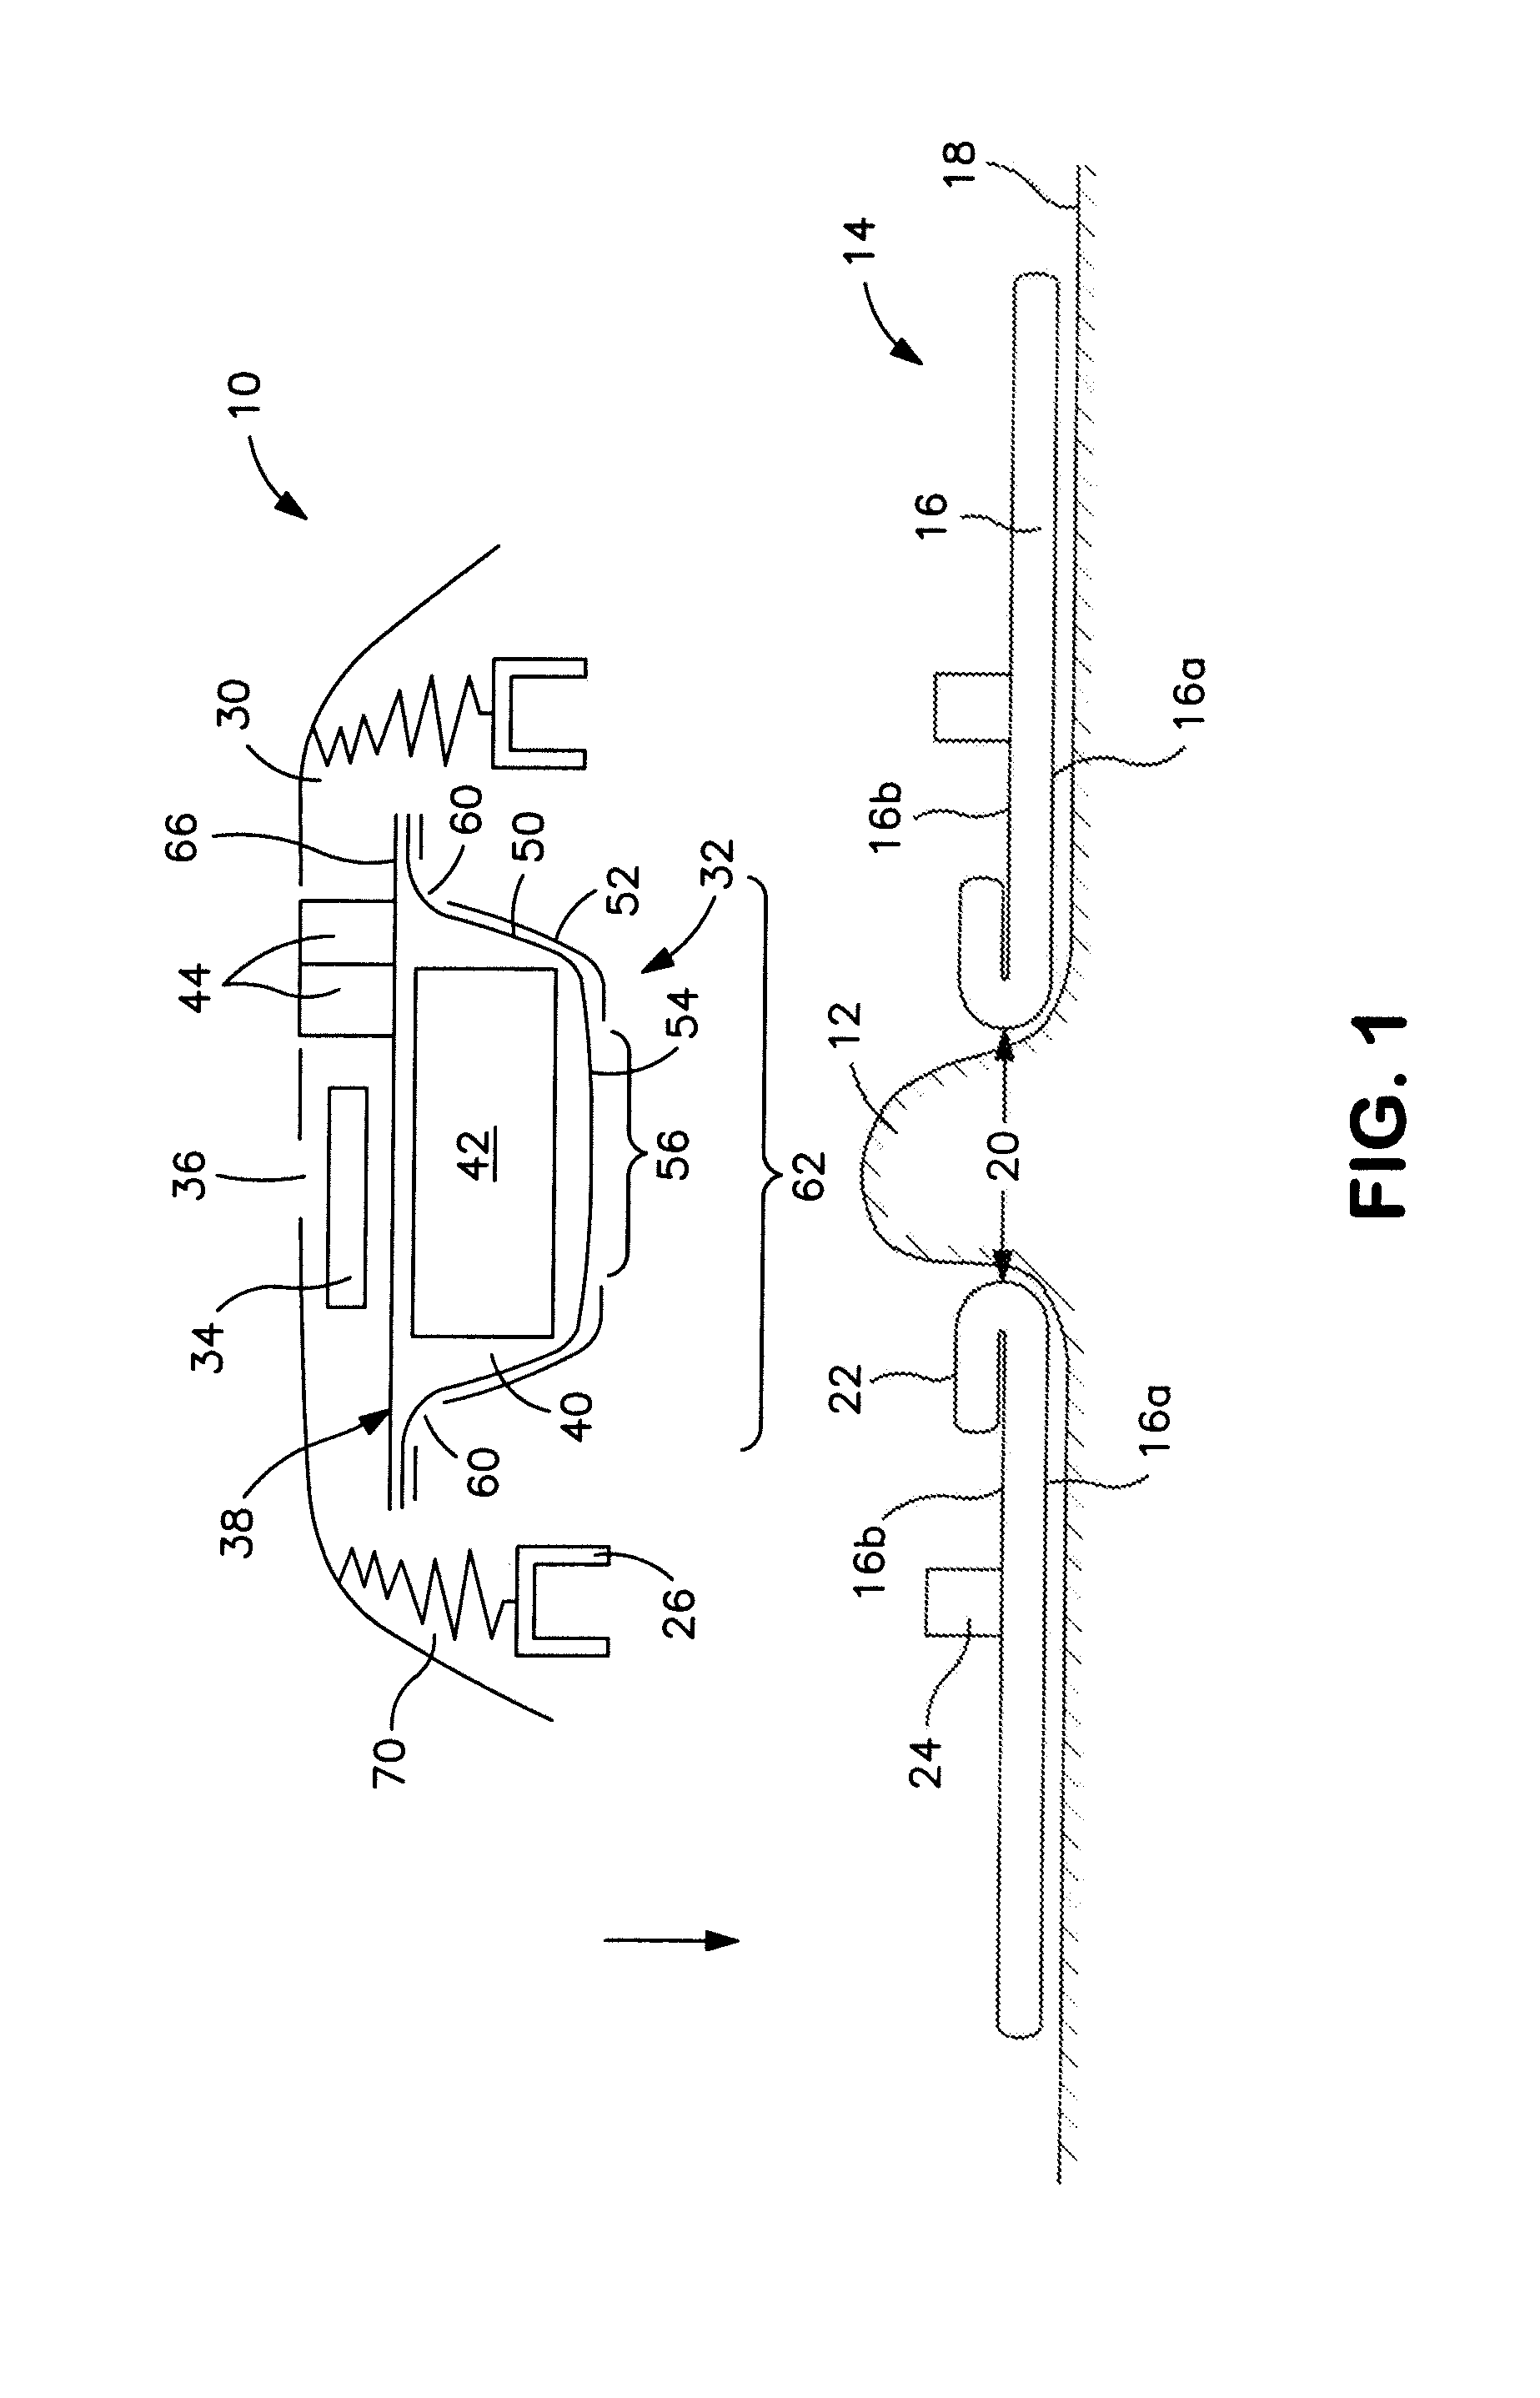 Controlled discharge ostomy appliance and moldable adhesive wafer